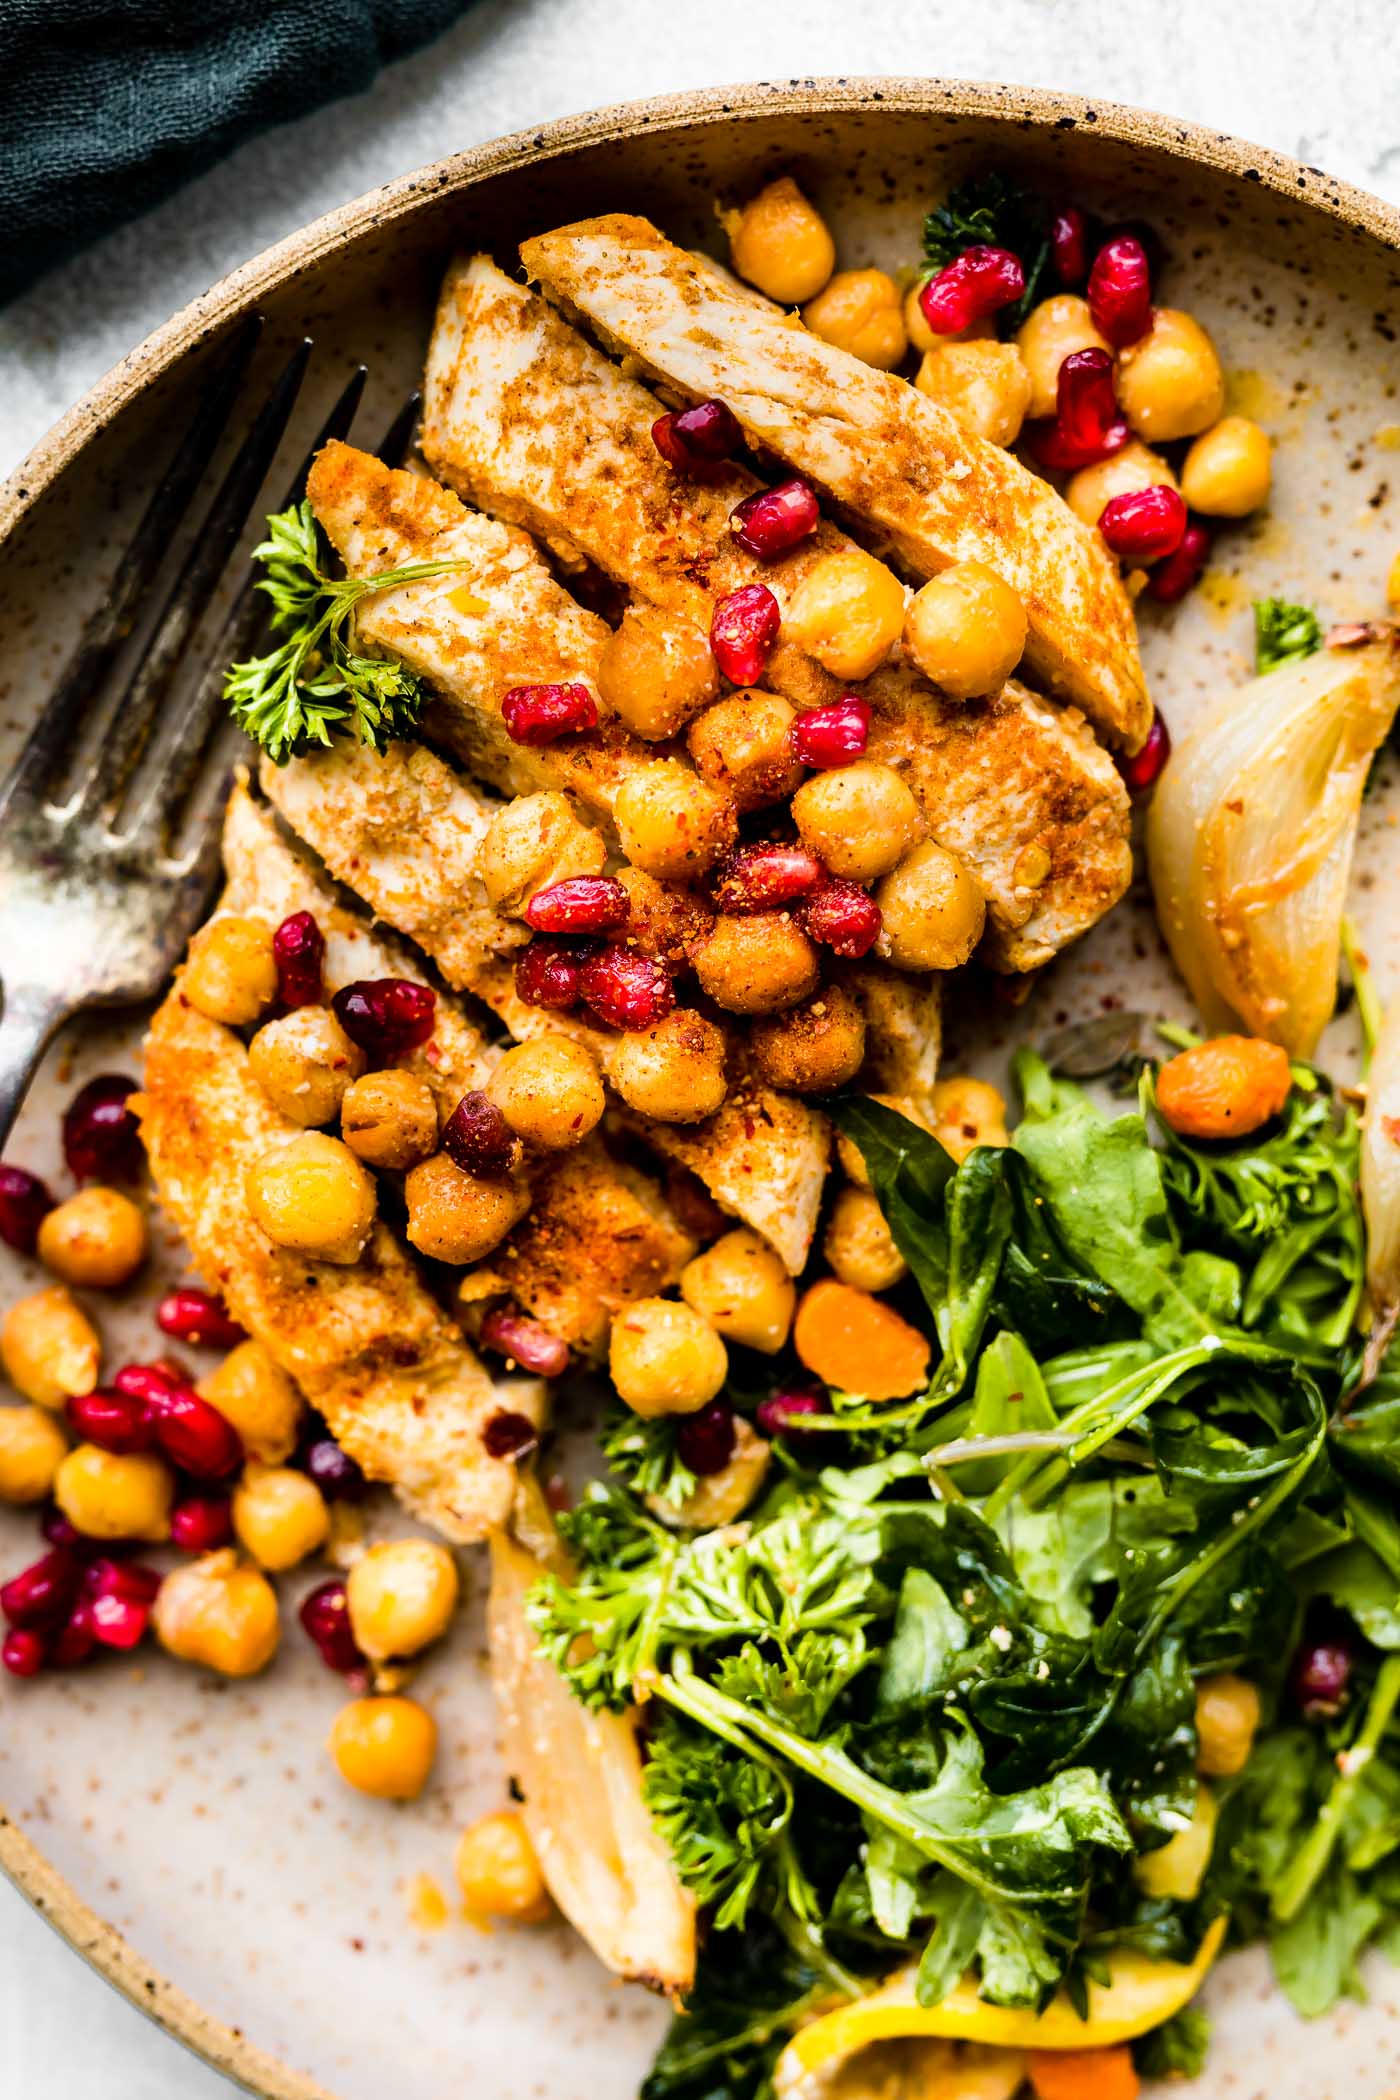 Cumin roasted chickpea chicken bowls are a gluten free weeknight dinner, packed with wholesome goodness and nutrition! This easy one pan meal combines tangy citrus and honey marinated chicken and roasted chickpeas into a delicious, easy baked chicken dinner recipe to love.